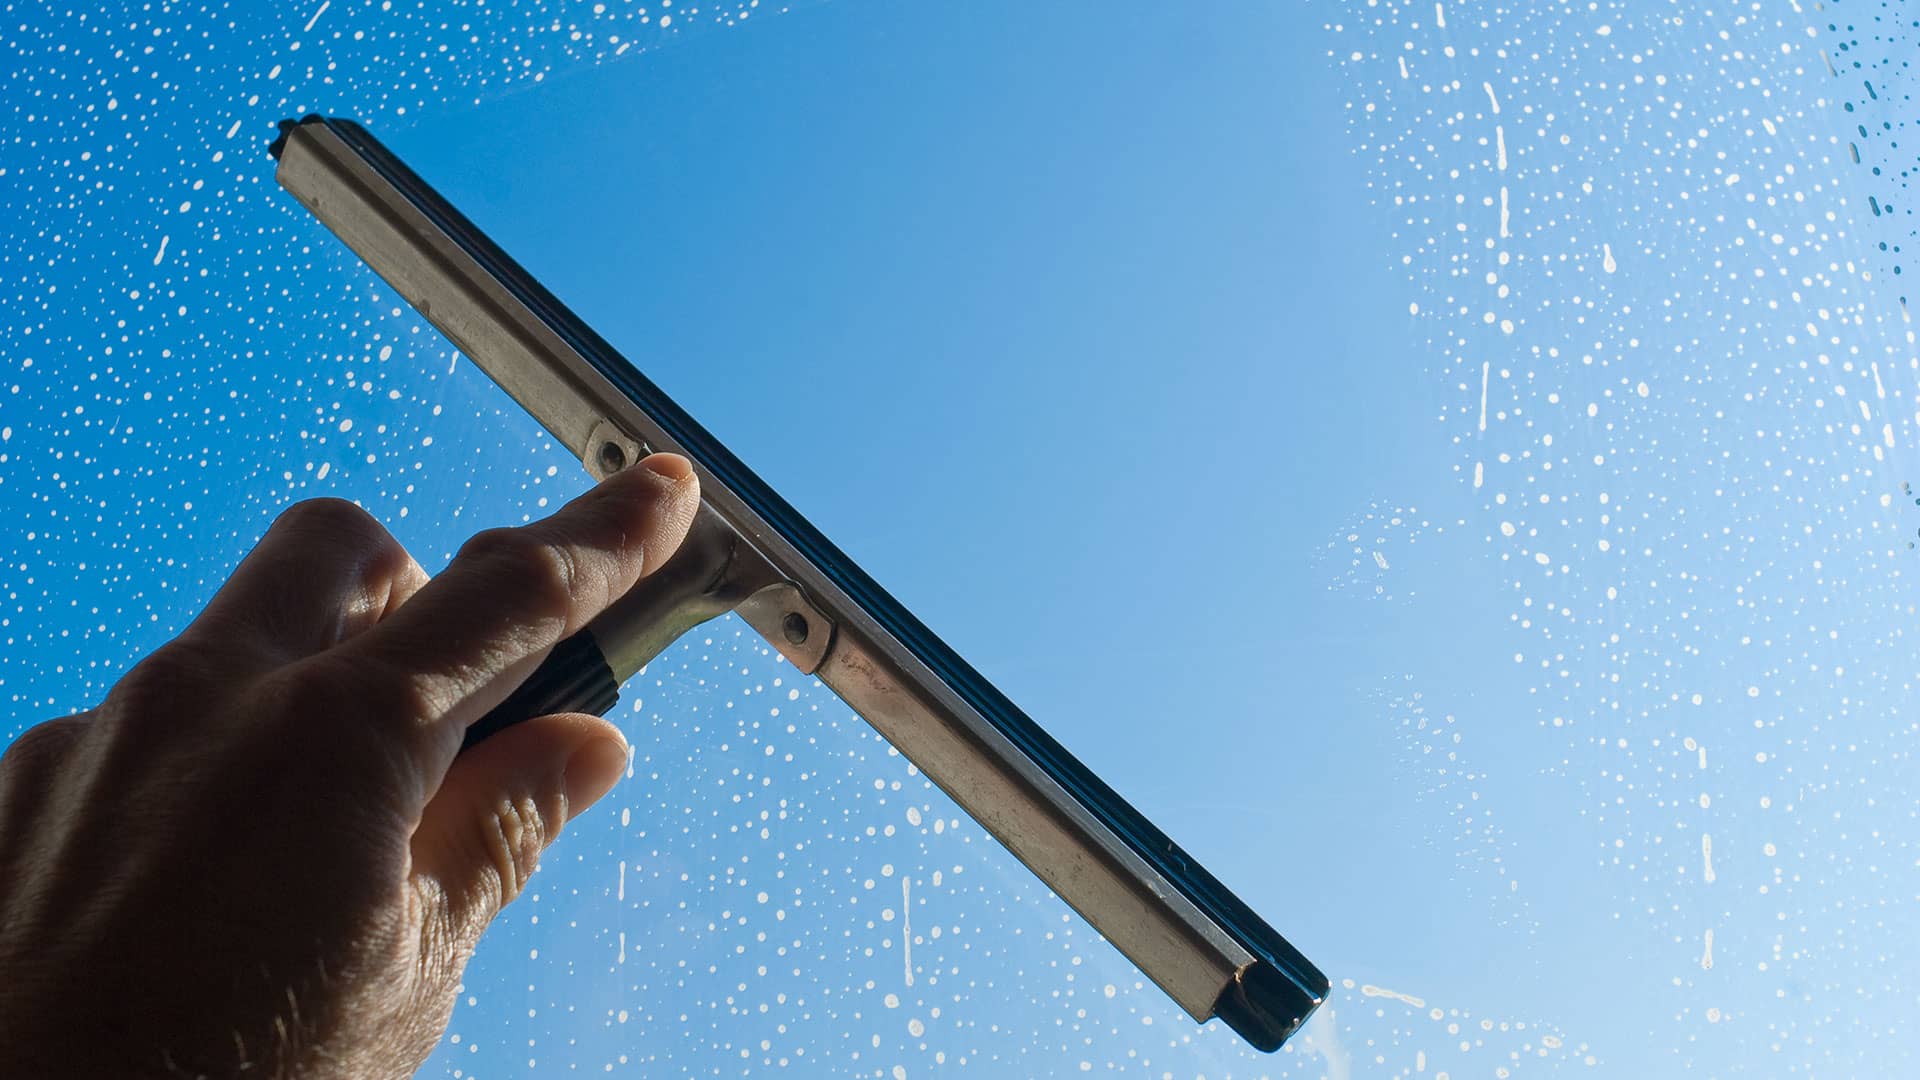 medford-window-cleaning-company